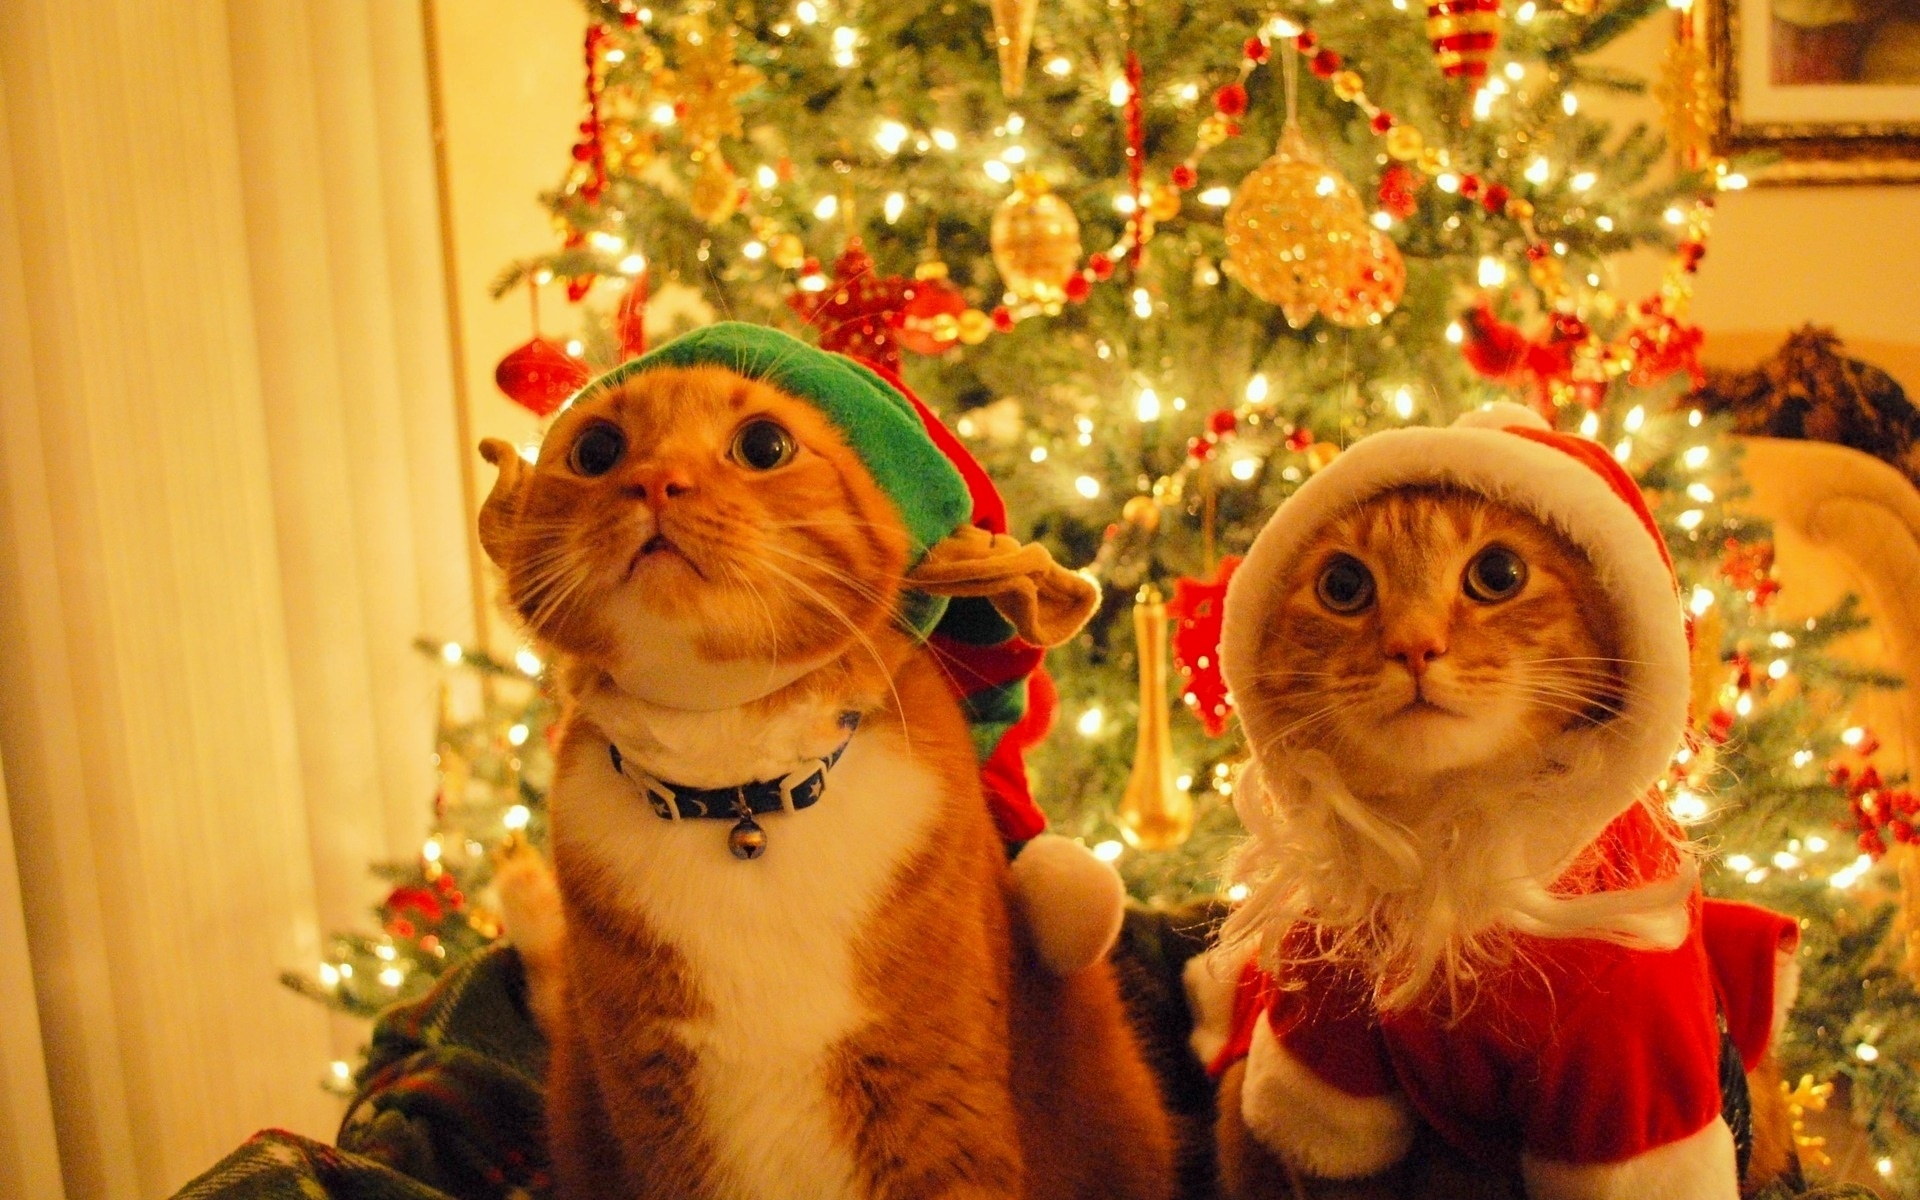 Christmas Cats with Santa Hat, ornaments & a cute expression amidst a festive backdrop, perfect for holiday desktop wallpaper.